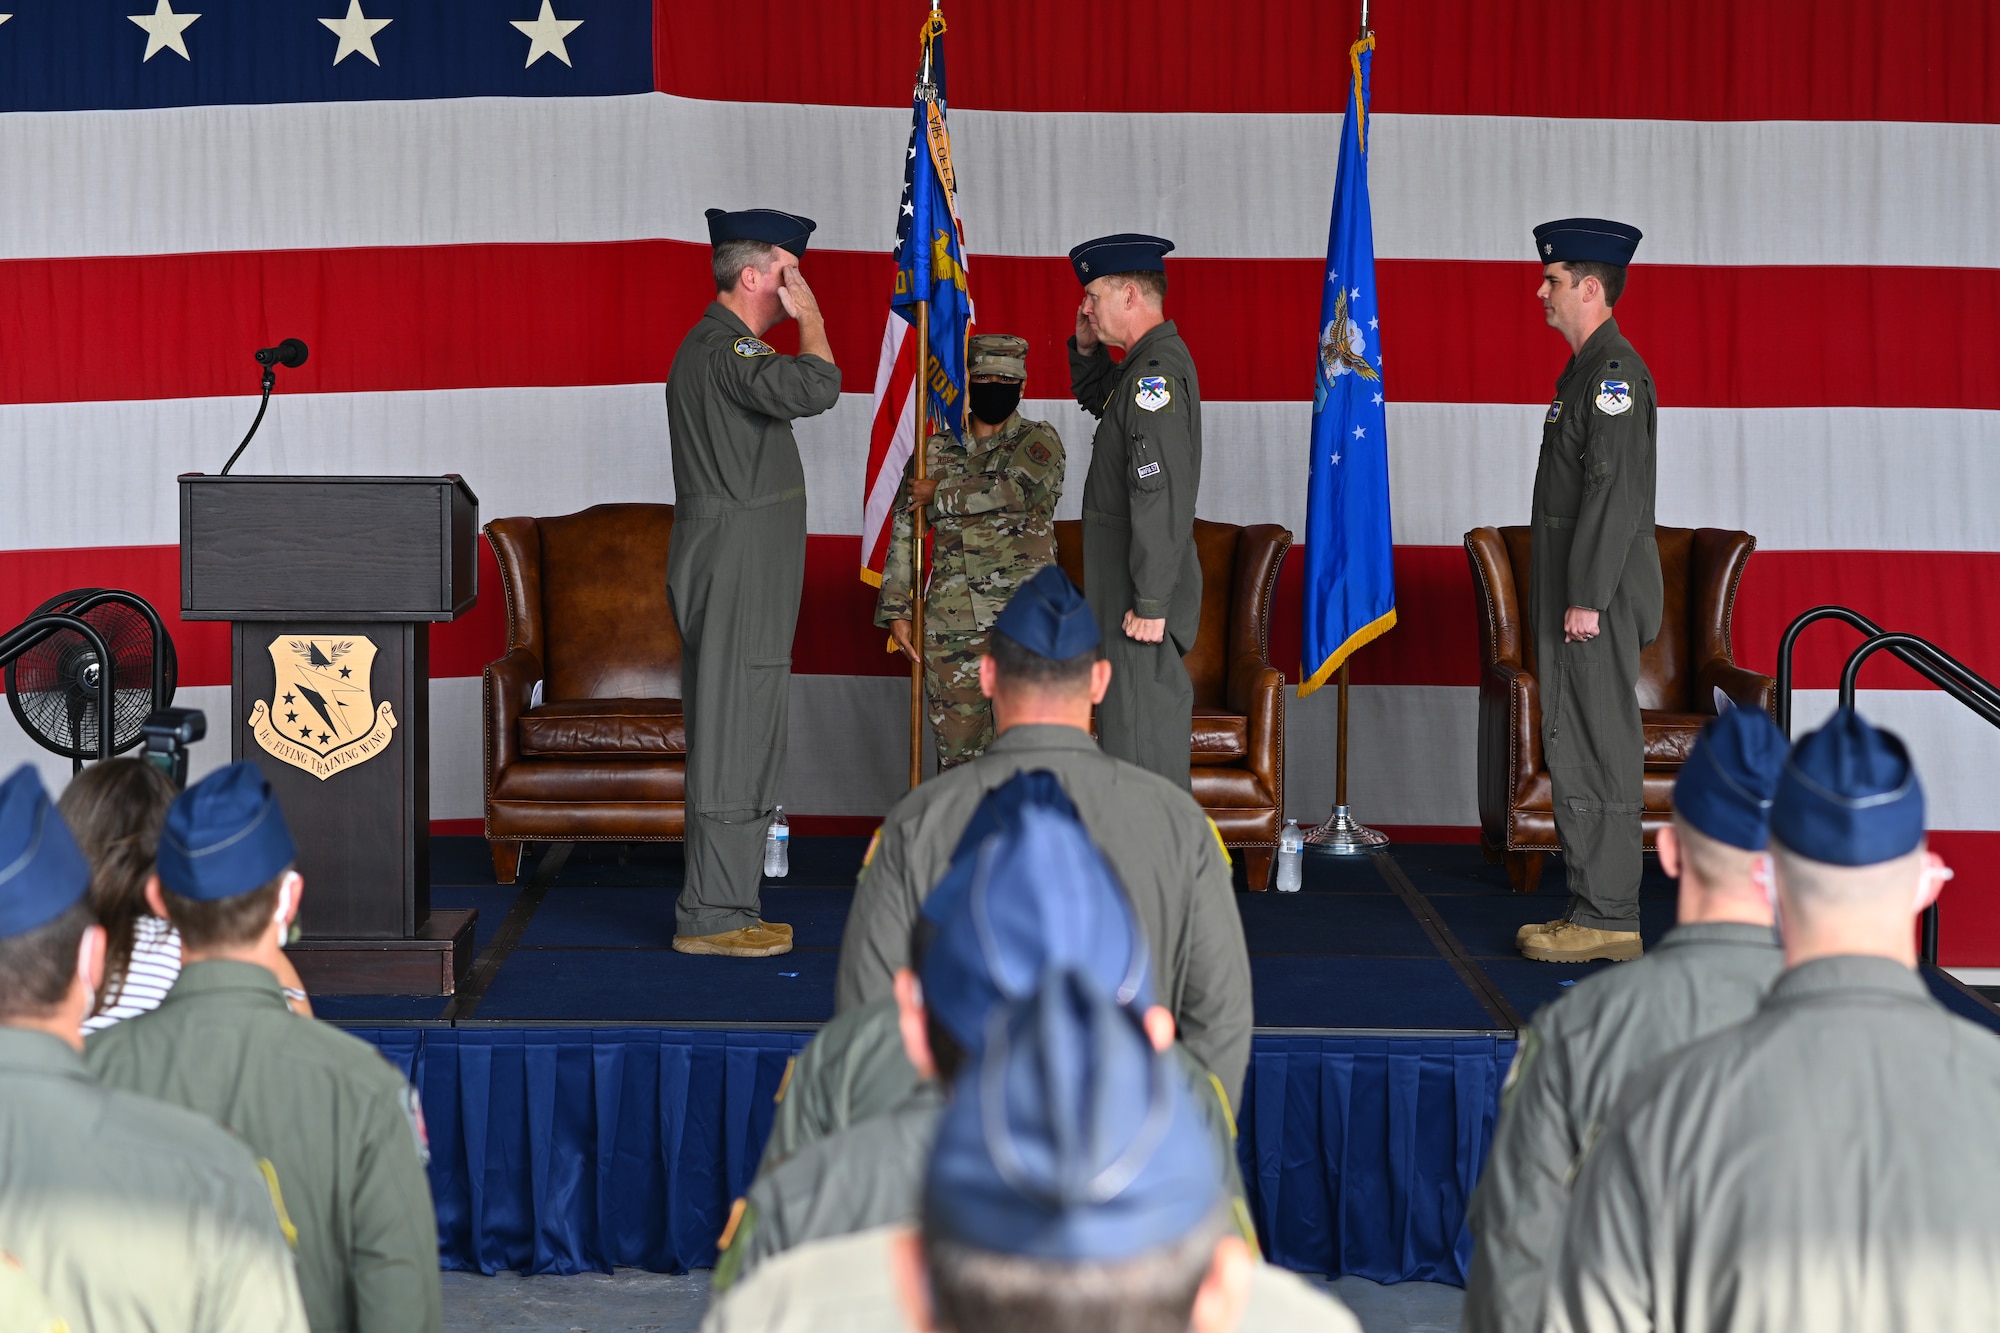 U.S. Air Force Col. Brent Drown, 340th Flying Training Group deputy commander, salutes Lt. Col. David Easterling, incoming 43rd Flying Training Squadron commander, during the 43th FTS Change of Command ceremony, Aug. 26, 2021, on Columbus Air Force Base, Miss. During wartime, or in the event of hostilities, the 43rd FTS is mobilized to offset anticipated losses of experienced active duty pilot contributions to the instructor pilot training programs. (U.S. Air Force photo by Senior Airman Jake Jacobsen)